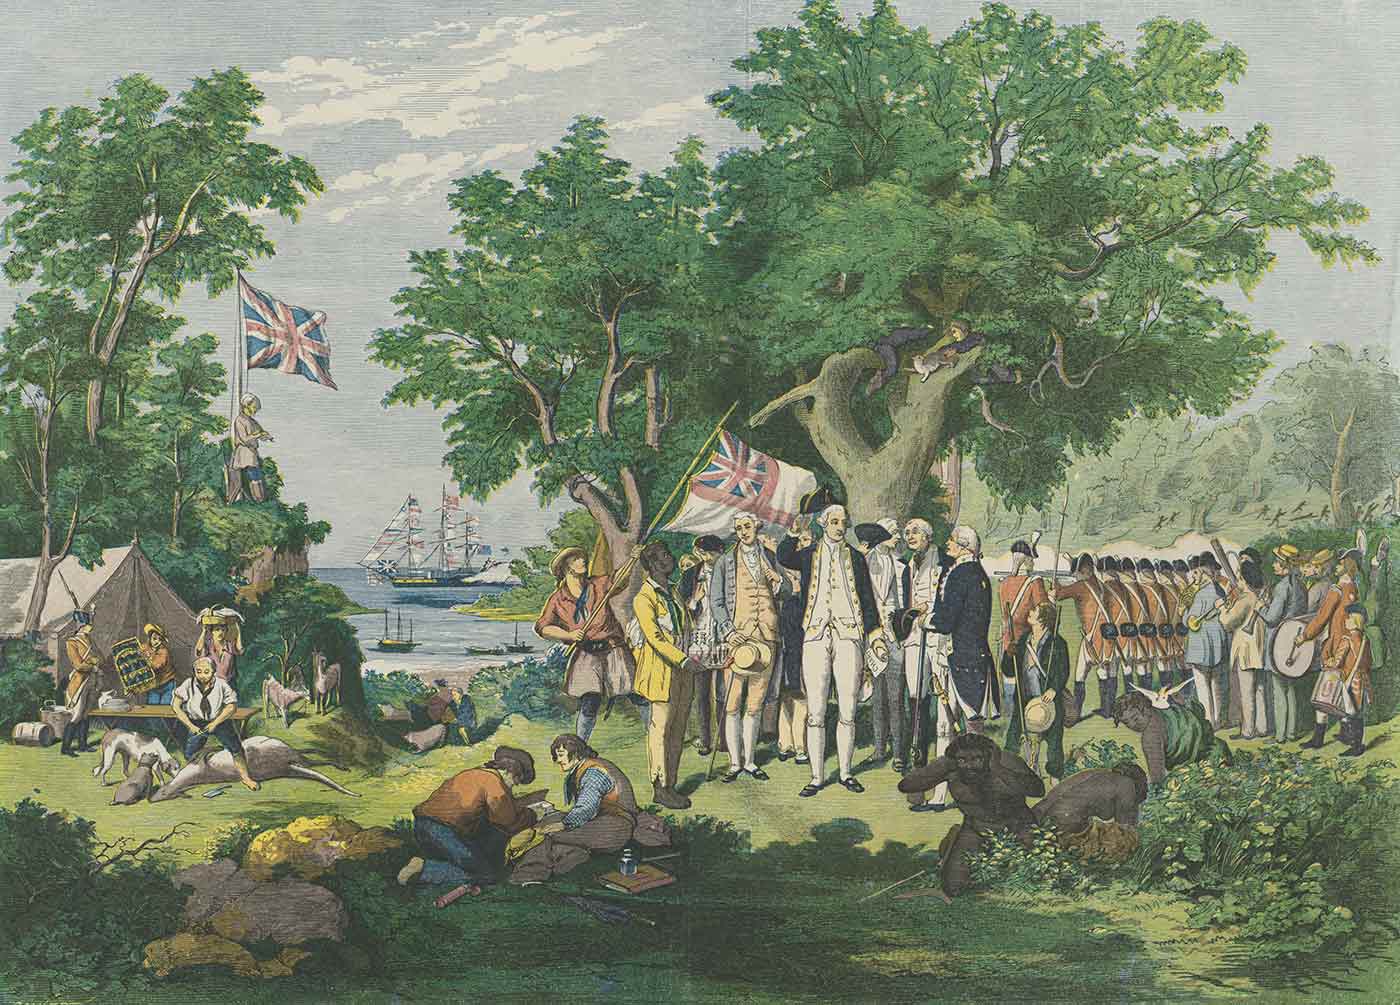 Captain Cook taking possession of the Australian continent on behalf of the British crown, AD 1770, under the name of New South Wales [picture] / drawn and engraved by Samuel Calvert from the great historical painting by Gilfillan in the possession of the Royal Society of Victoria. Published Illustrated Sydney news. 1865 Dec. - click to view larger image